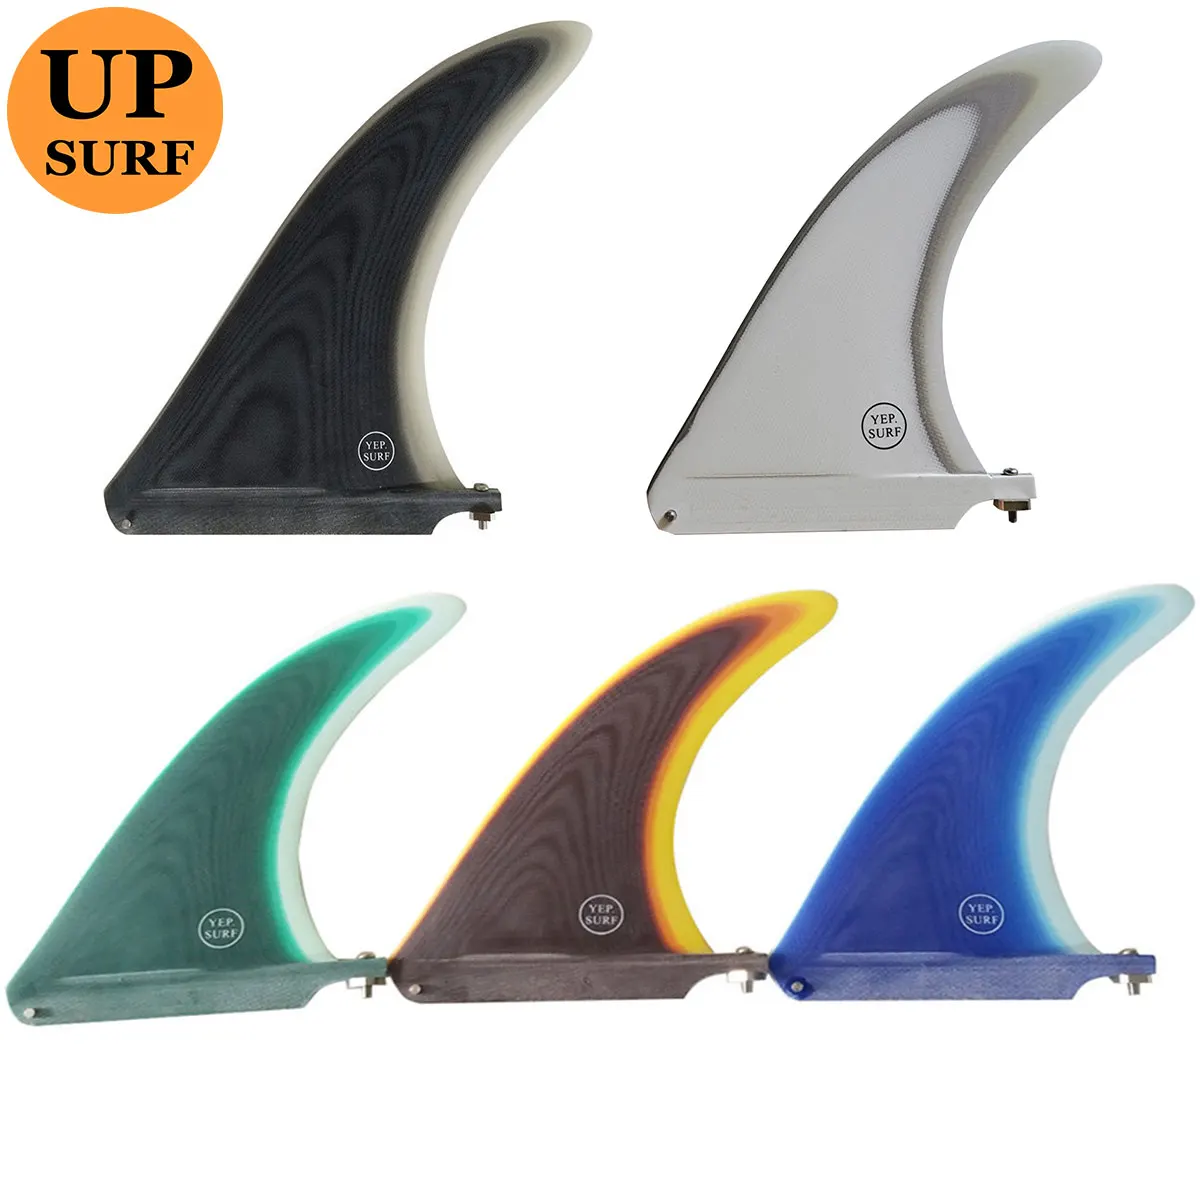 Surfboard fin Black/Brown/Green/White/Blue Single fin longboard 7/8/9/10.25/11 inch length sup accessories Good Quality